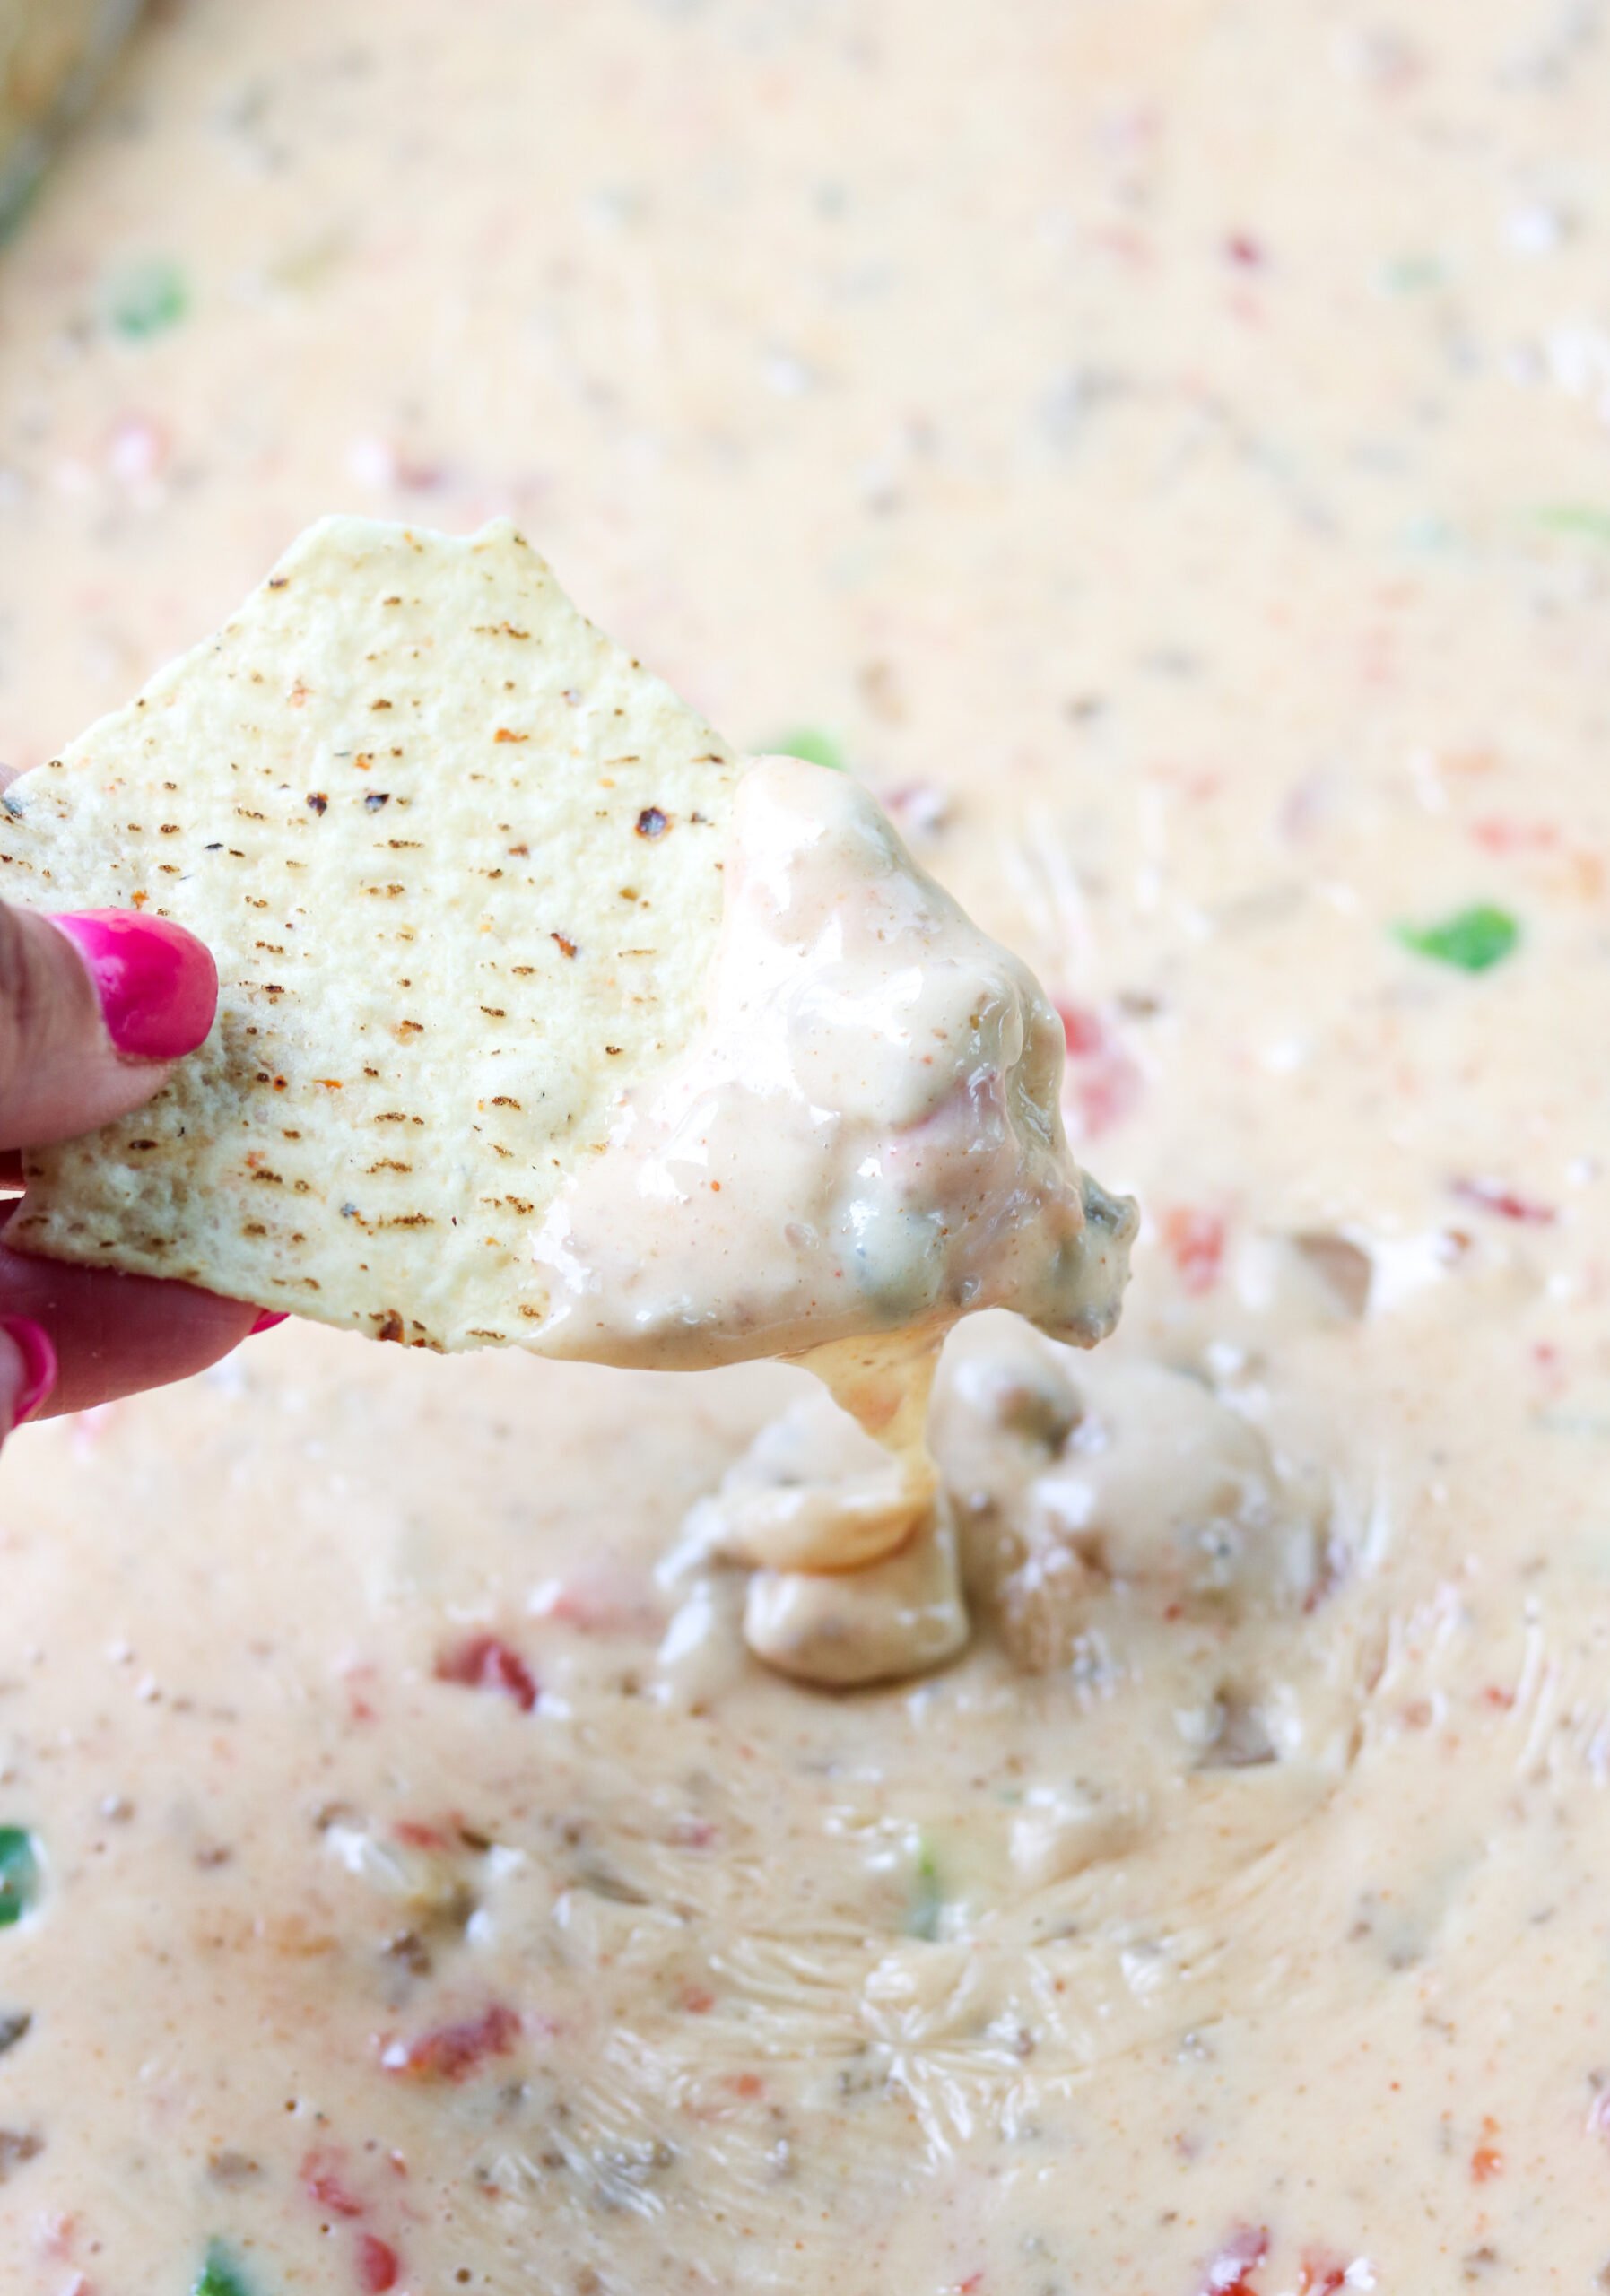 a hand dipped a tortilla chip into smoked queso dip.